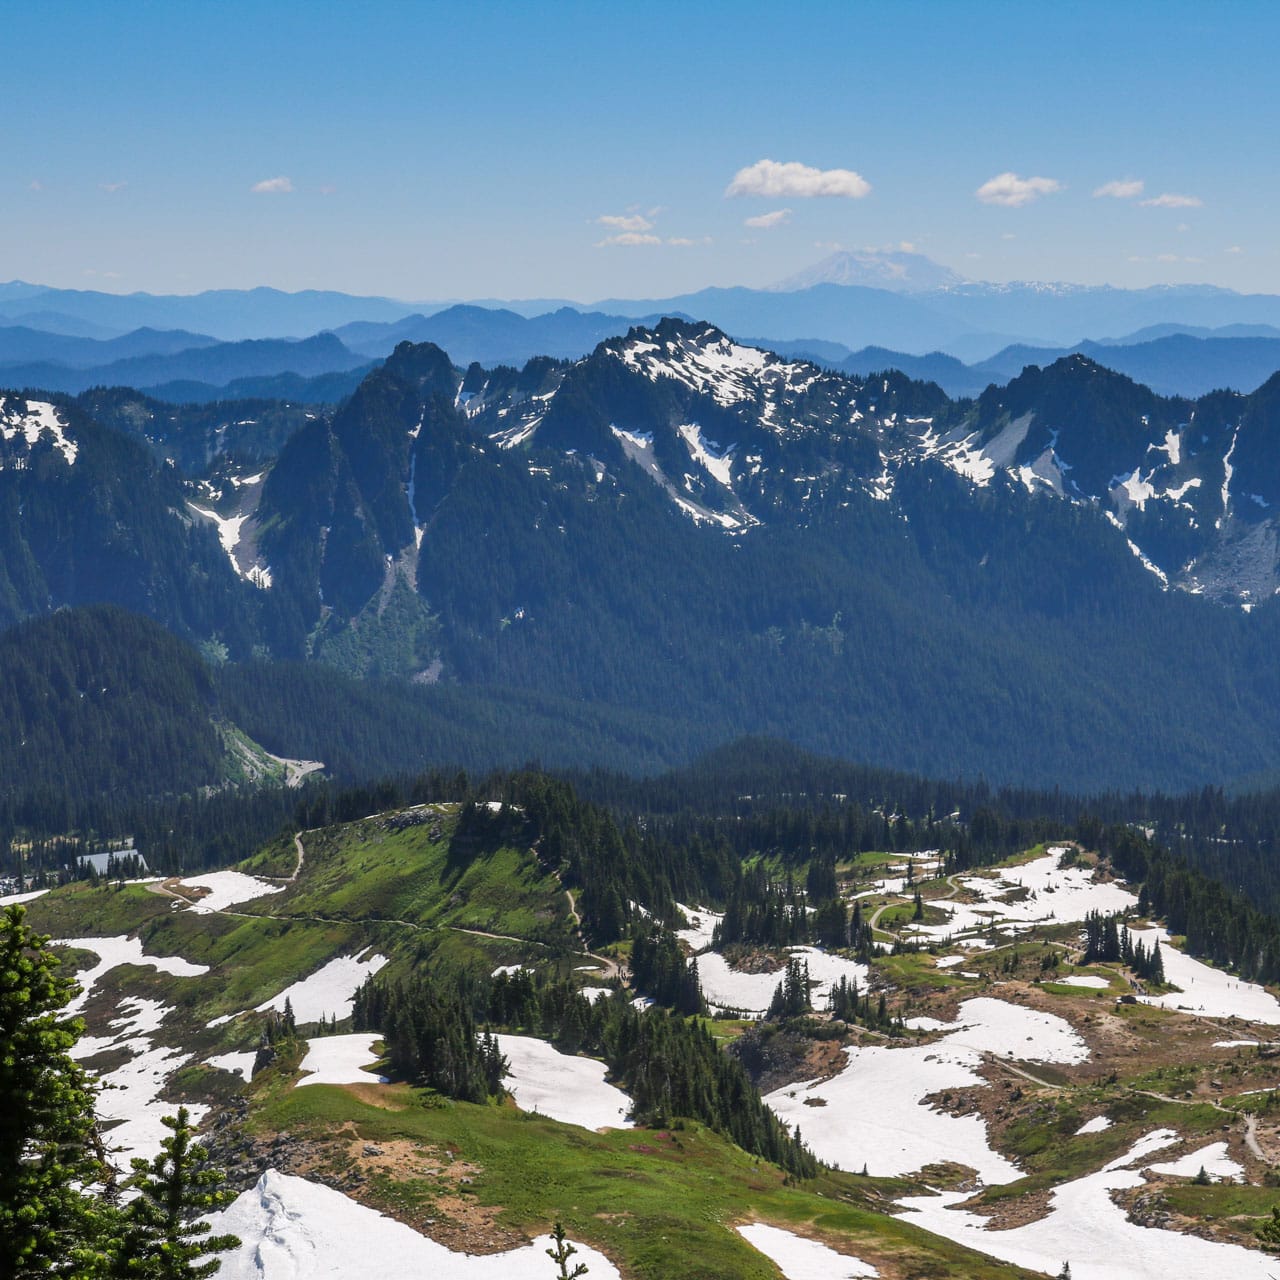 View of Paradise from Panorama Point, Mount Rainier National Park